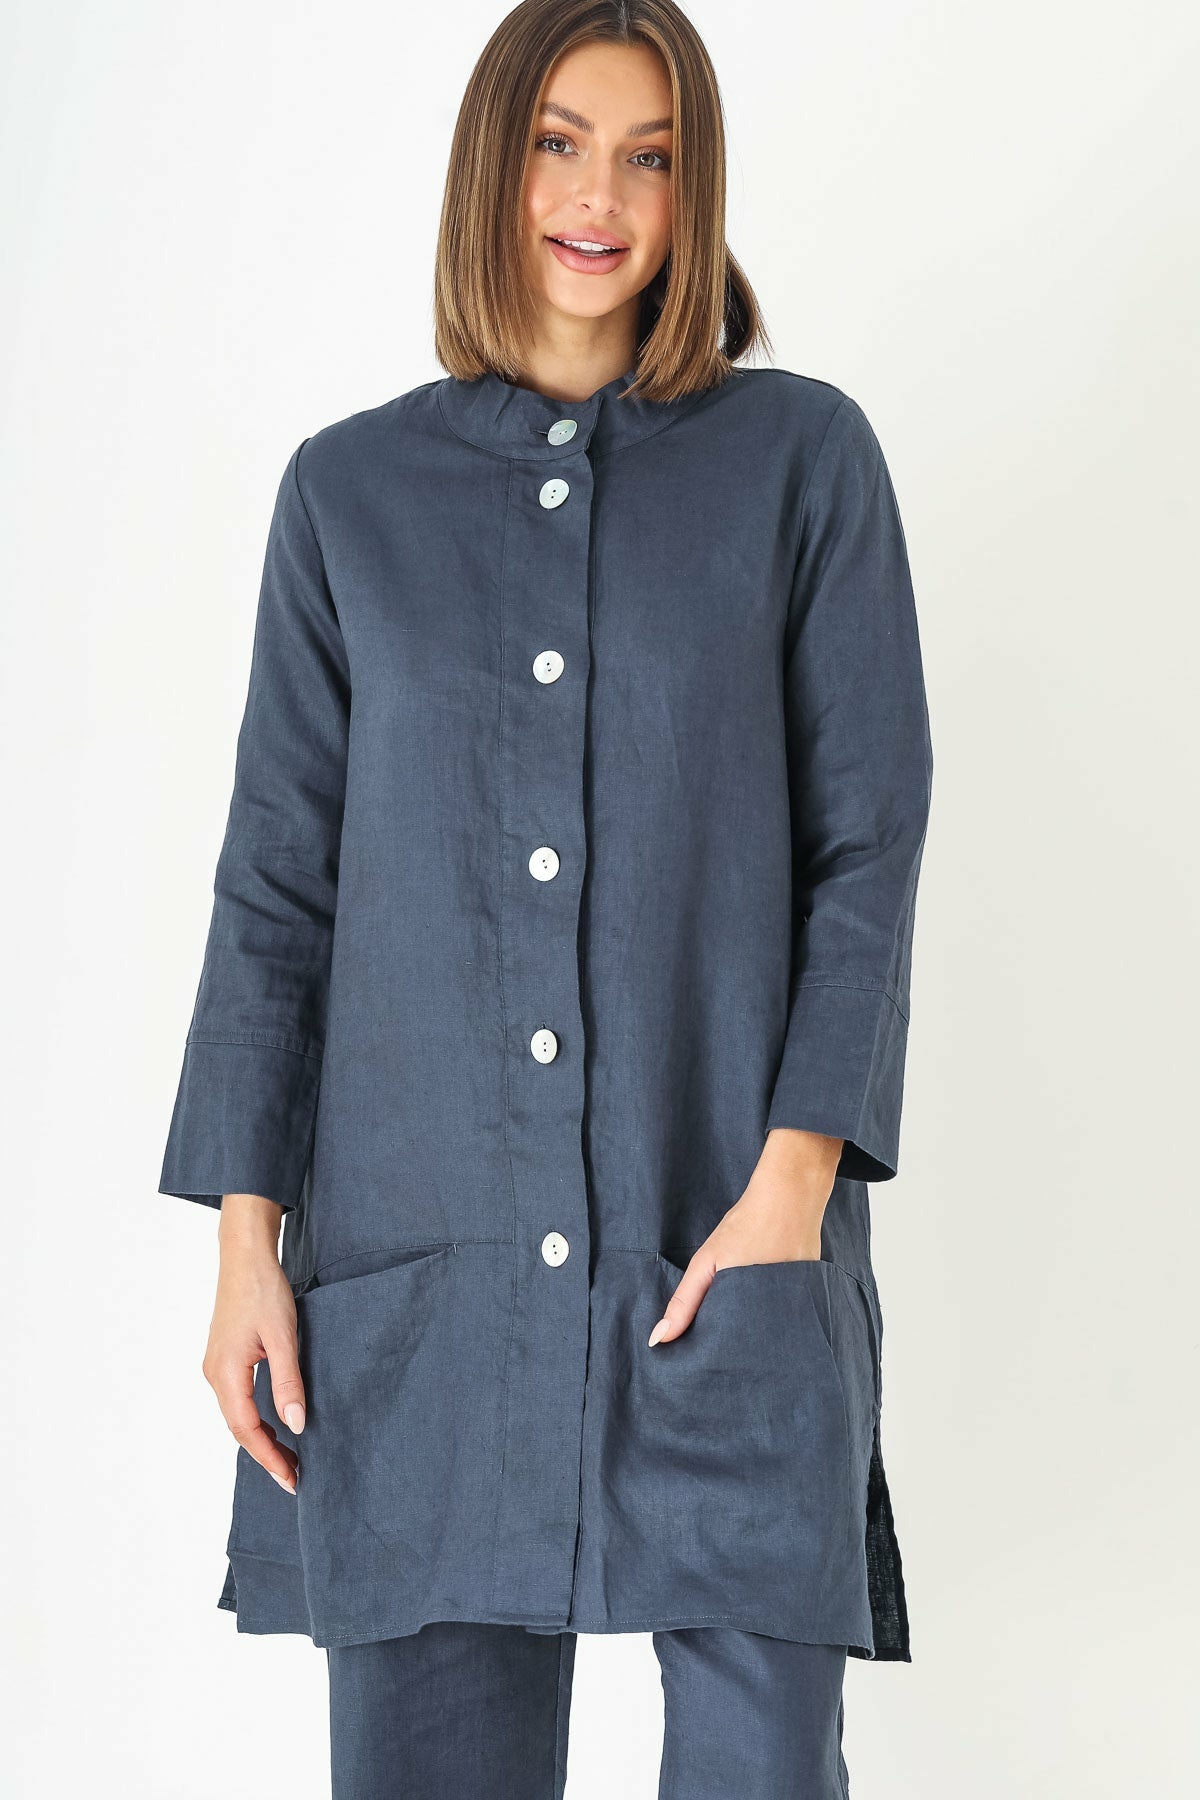 Naturals by O & J Linen Coat in Graphite